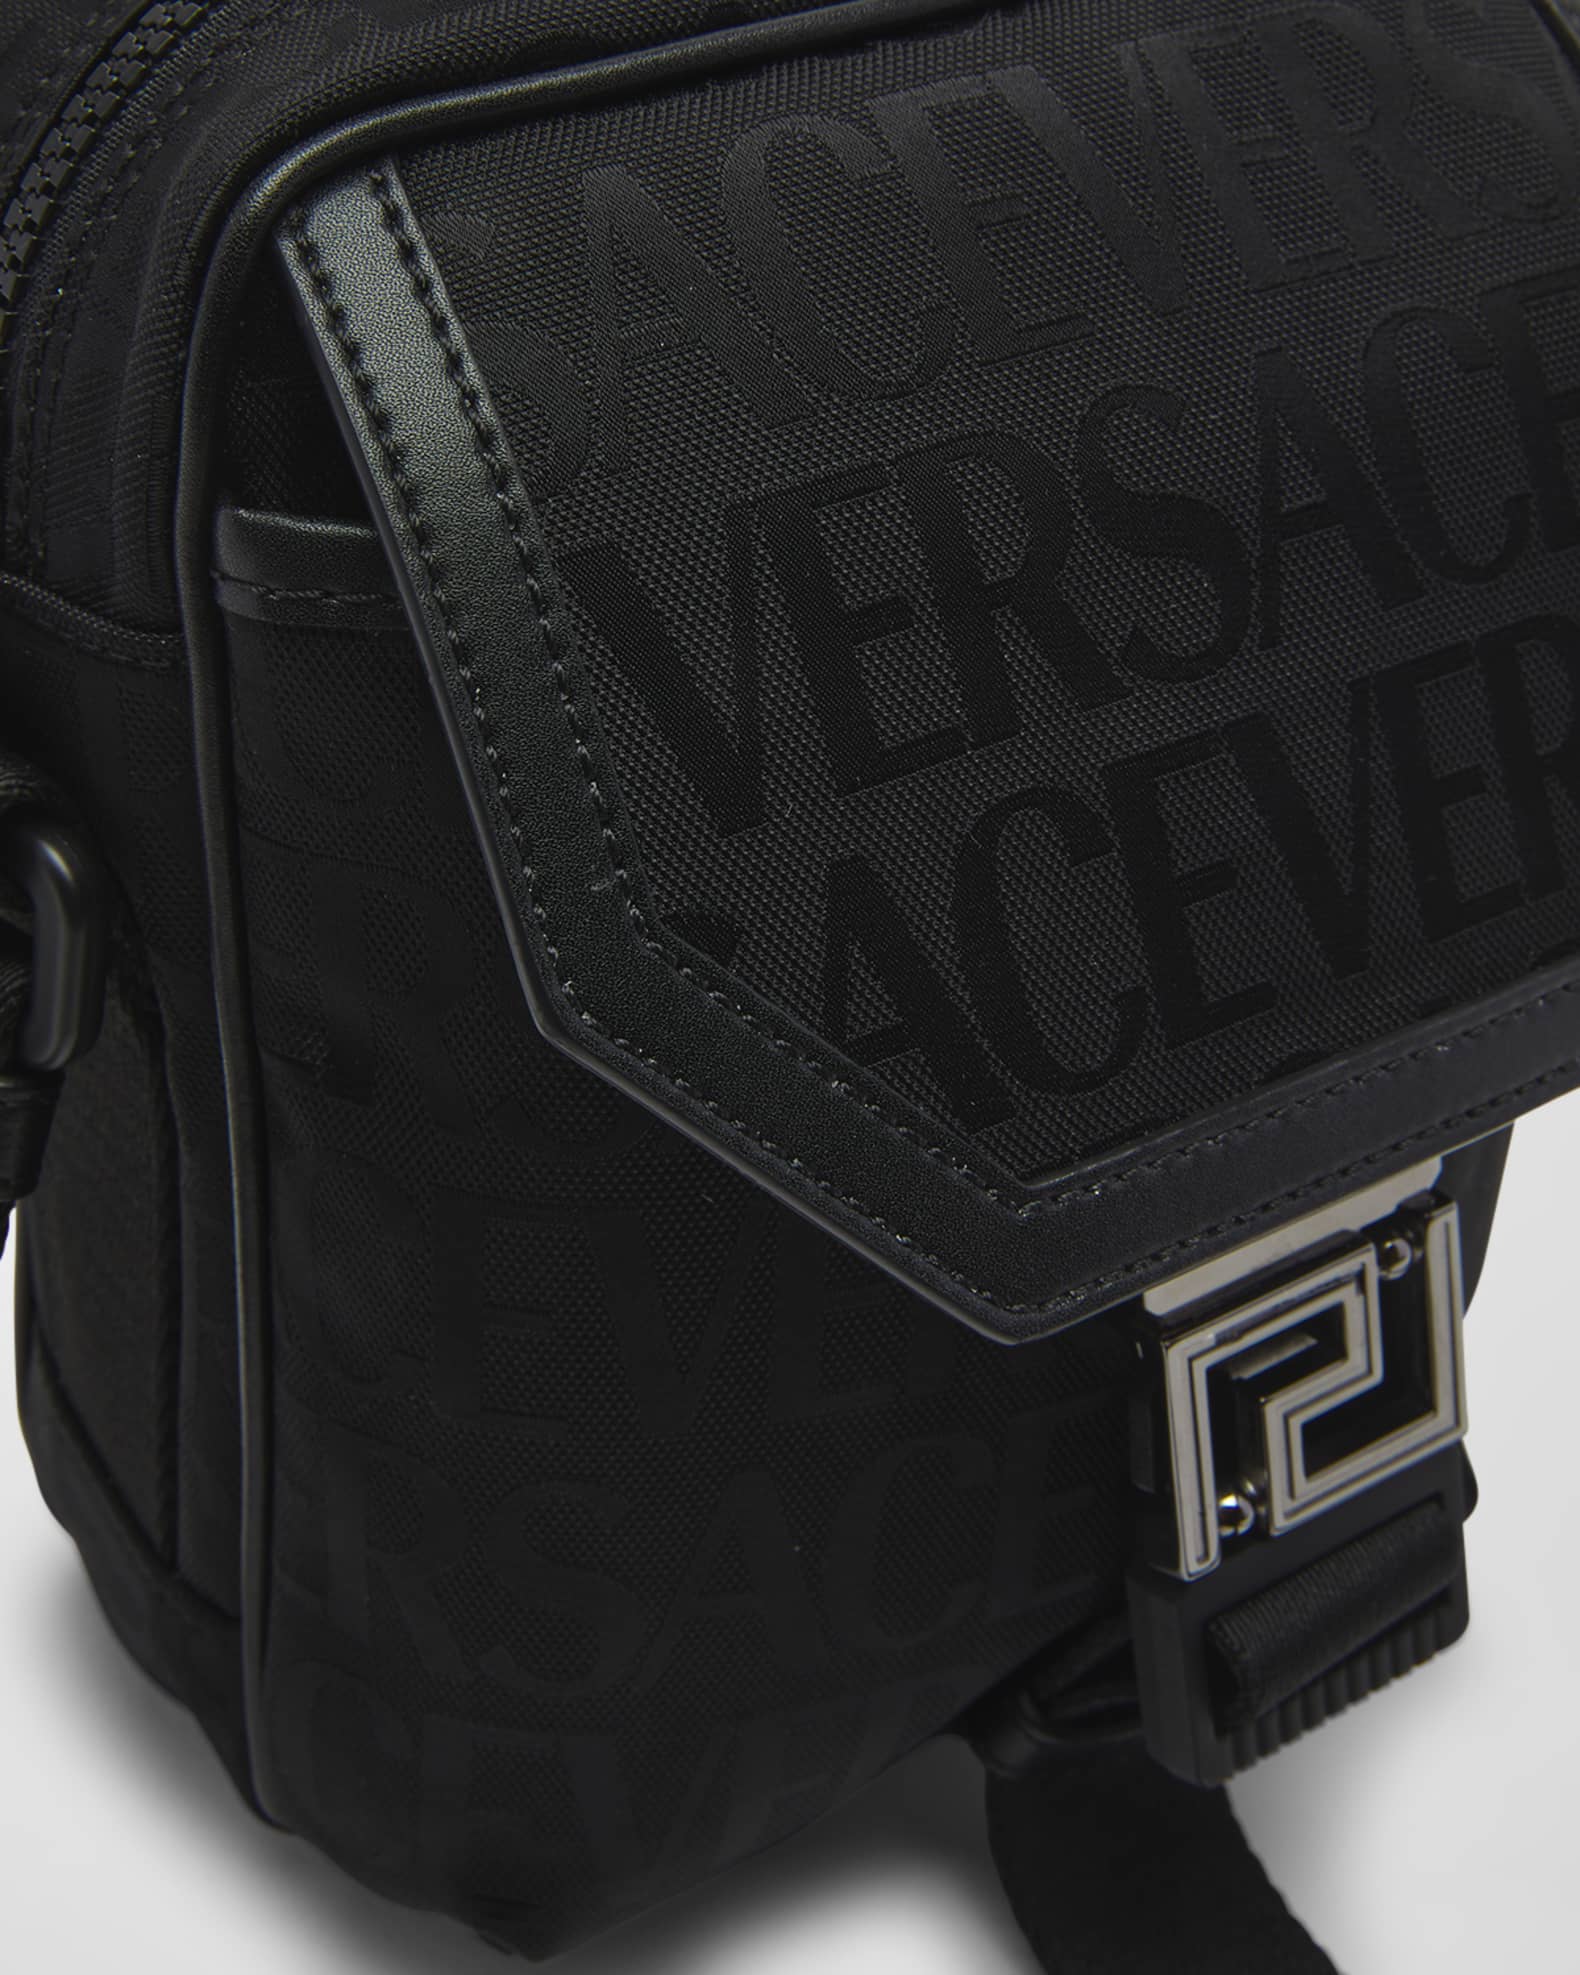 Versace Black Leather Messenger Bag ○ Labellov ○ Buy and Sell Authentic  Luxury